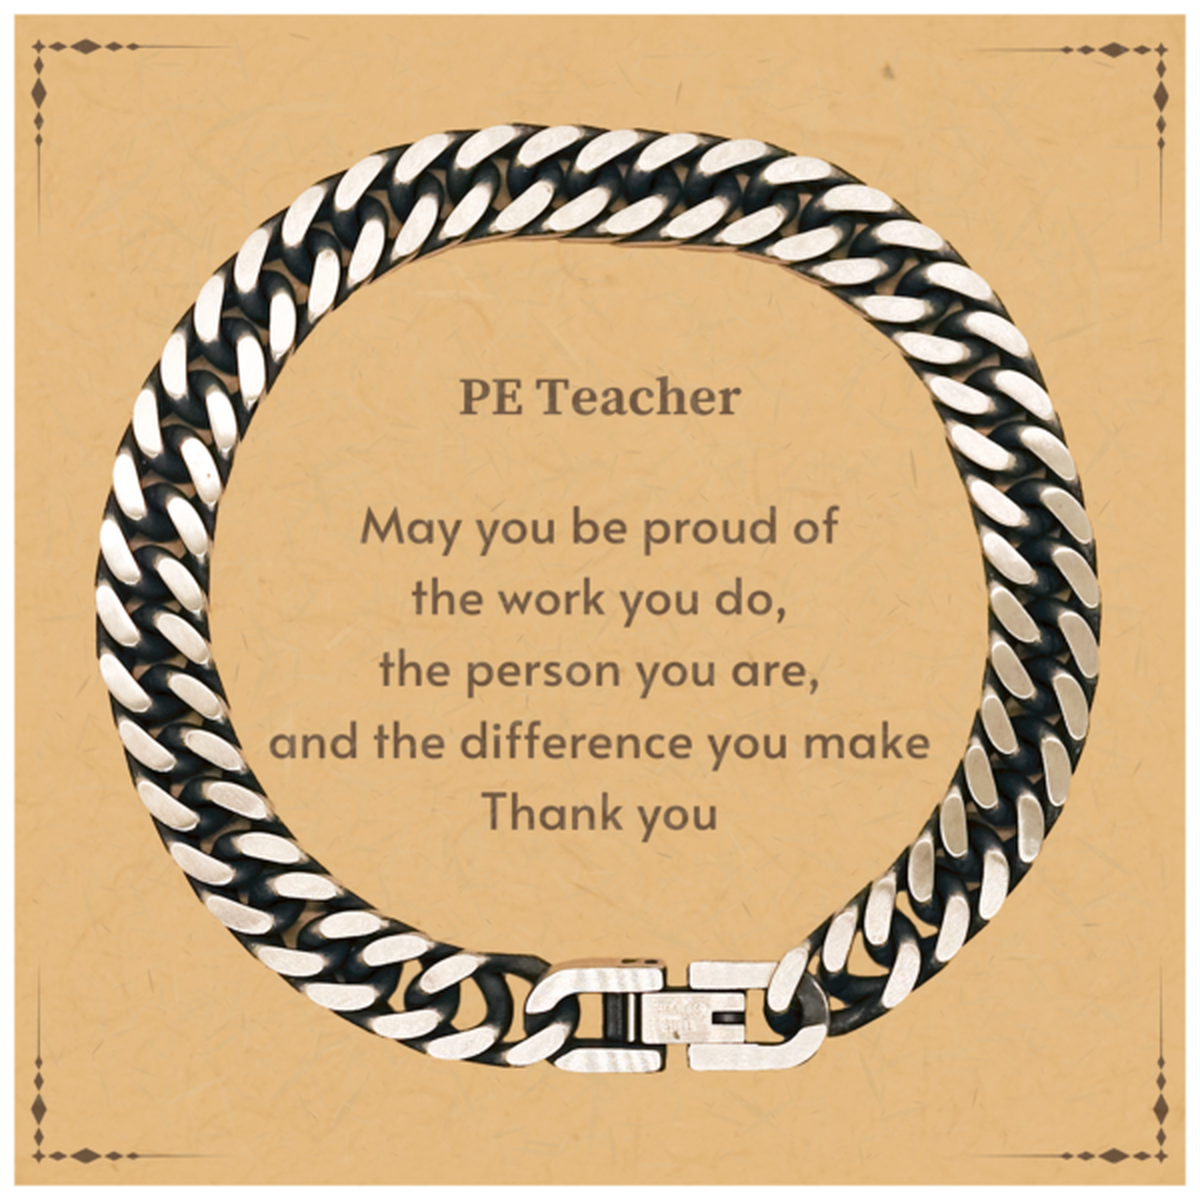 Heartwarming Cuban Link Chain Bracelet Retirement Coworkers Gifts for PE Teacher, PE Teacher May You be proud of the work you do, the person you are Gifts for Boss Men Women Friends